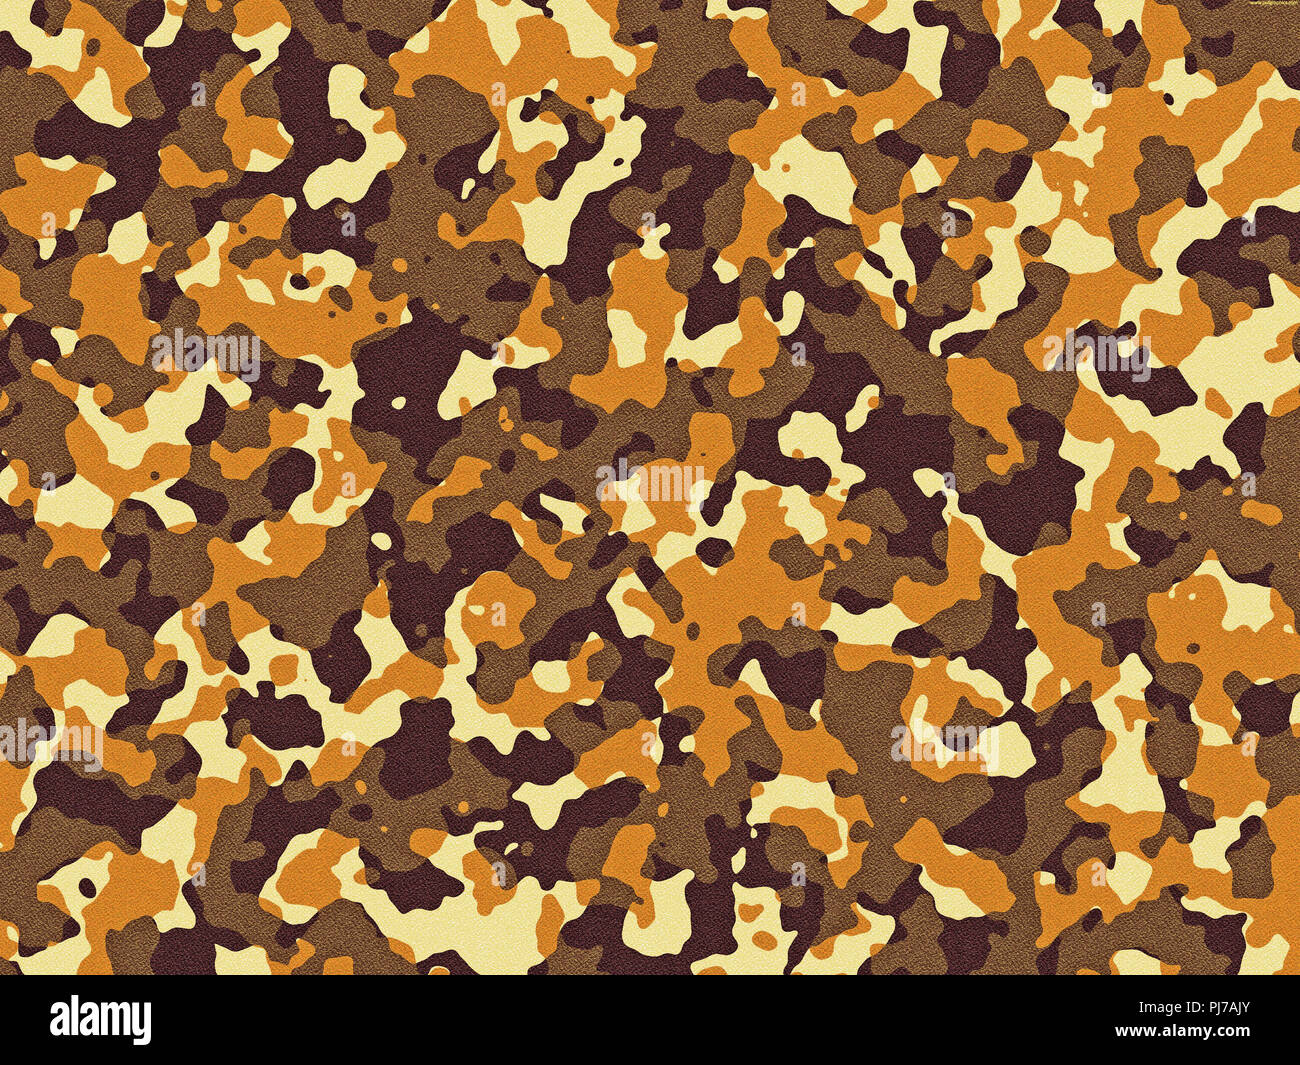 Textured brown and orange camouflage pattern background Stock Photo - Alamy